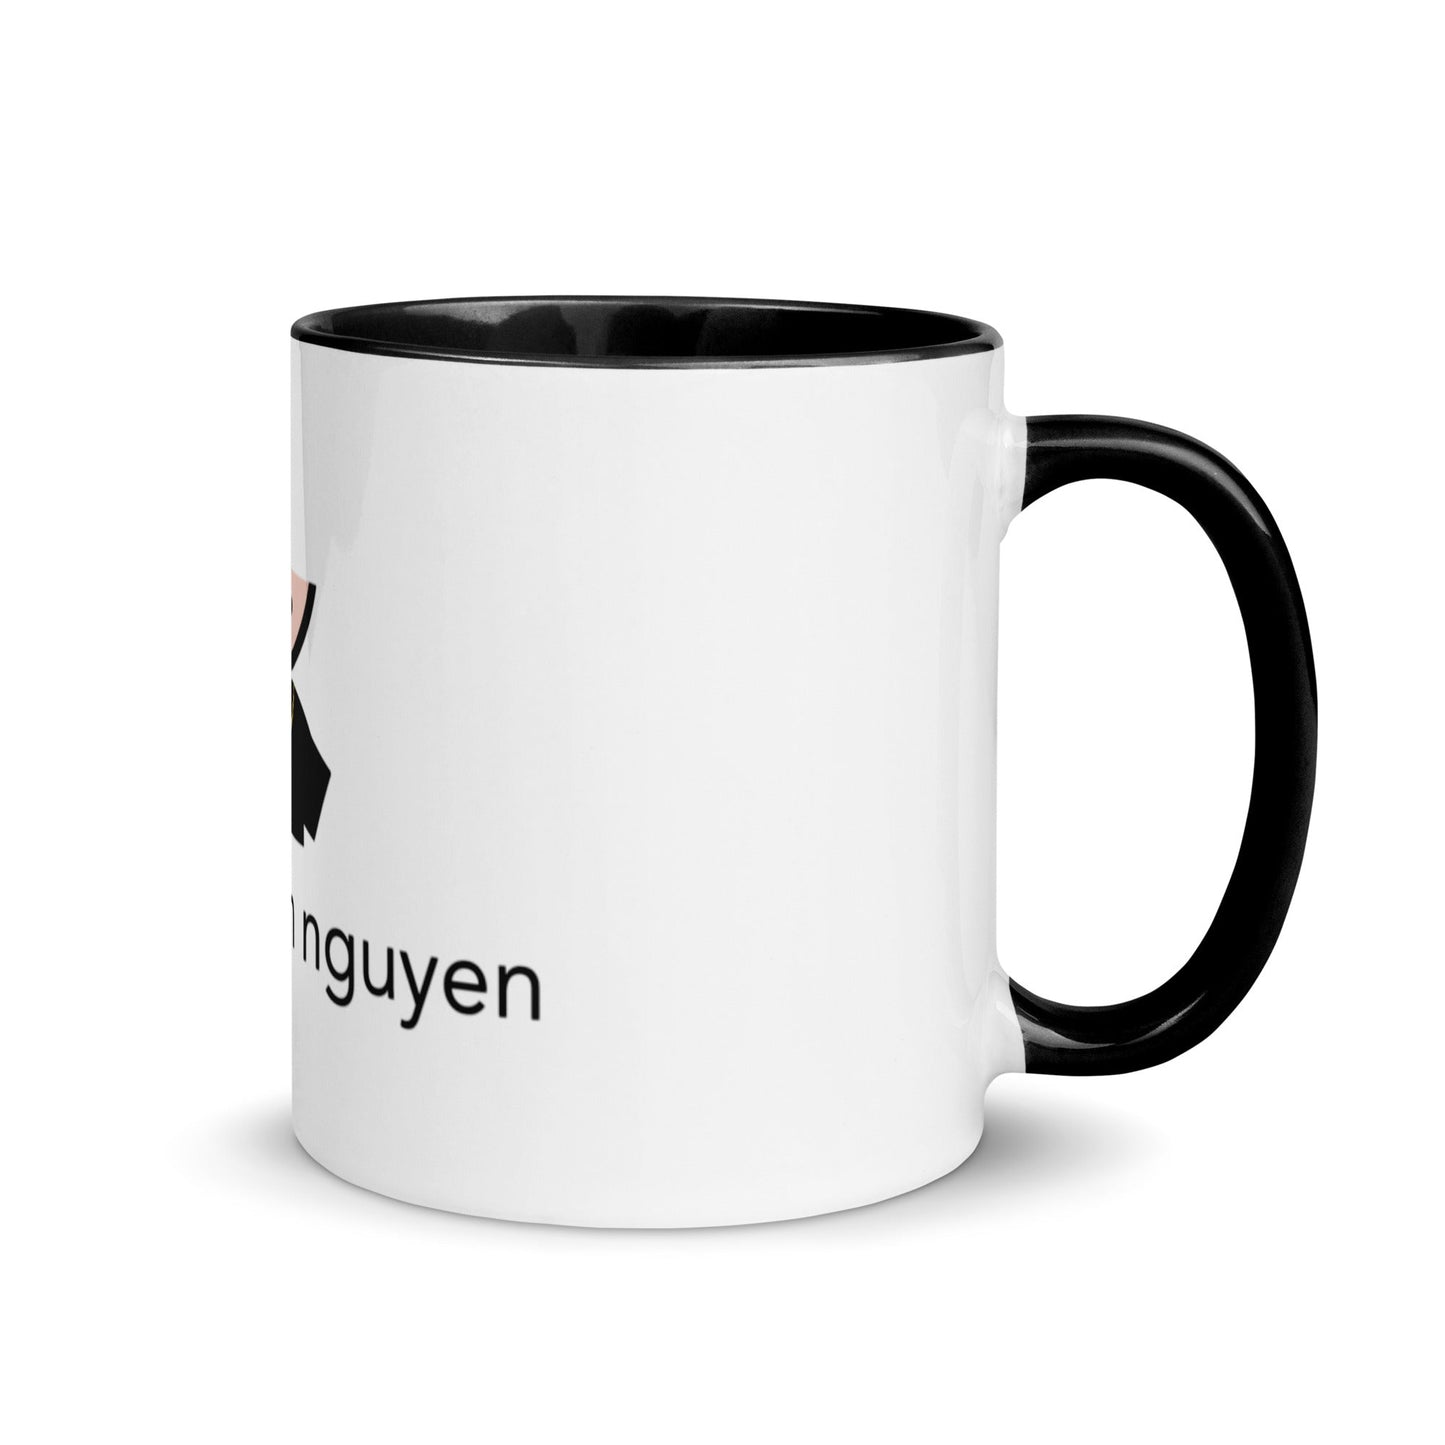 Not A Kevin Nguyen Mug with Color Inside - chucklecouture co.